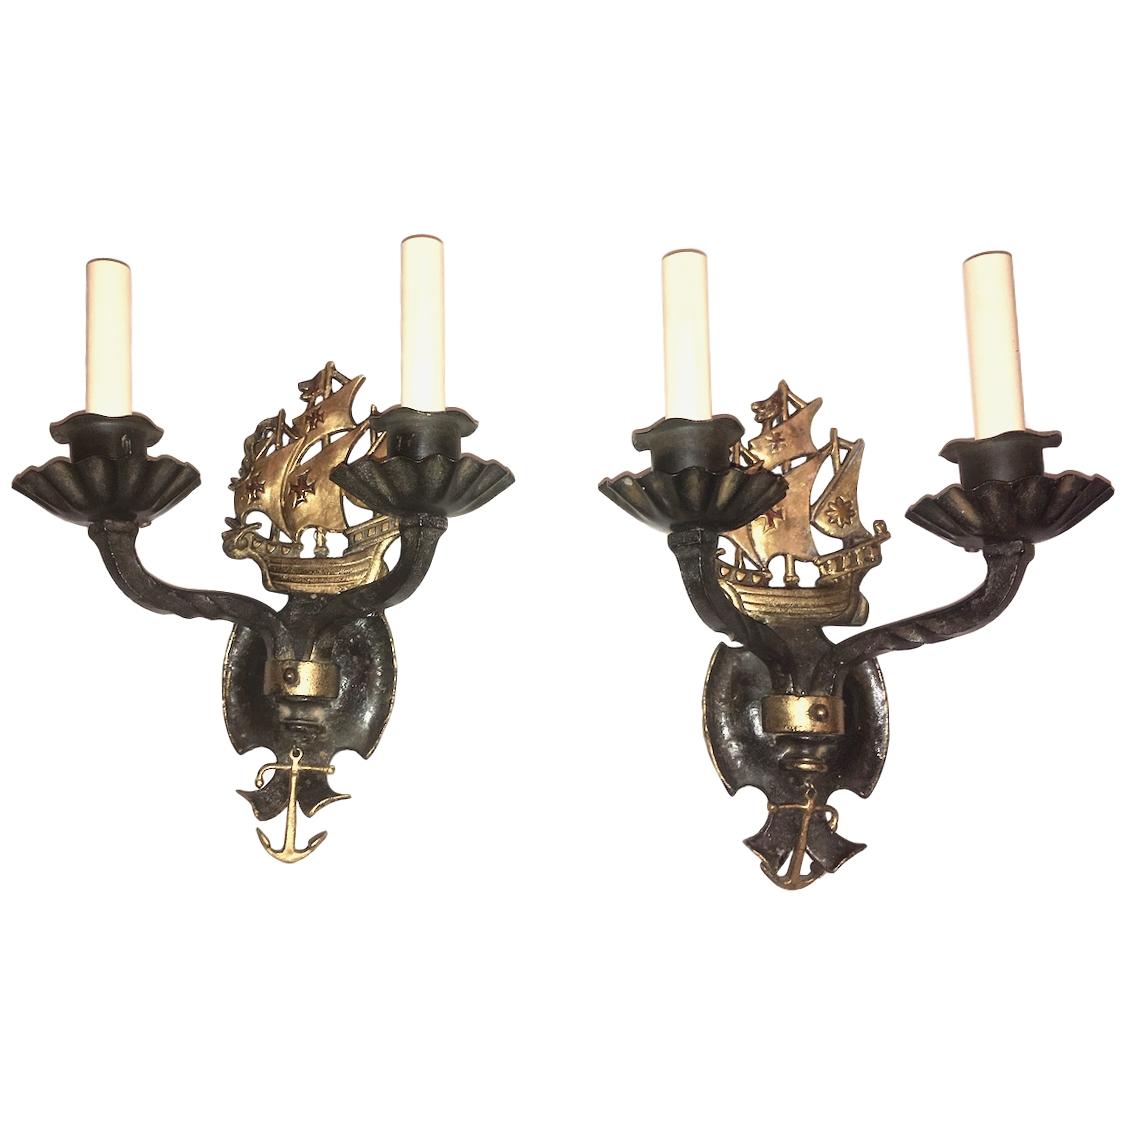 A pair of circa 1920’s American cast iron sconces with original painted finish, decorated with sail ships and anchors.

Measurements:
Height: 13″
Depth: 6″
Width: 10″